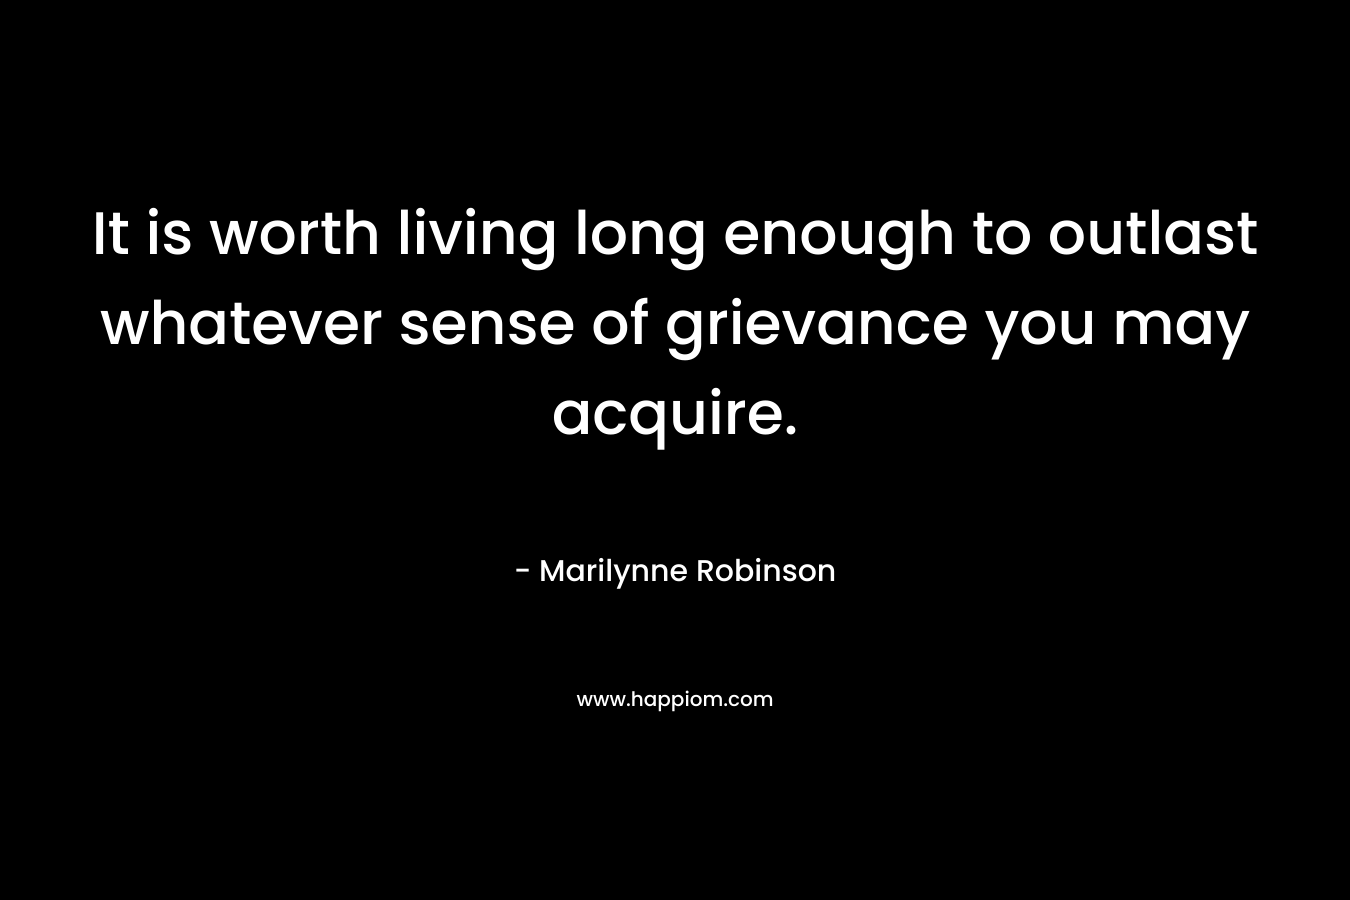 It is worth living long enough to outlast whatever sense of grievance you may acquire.